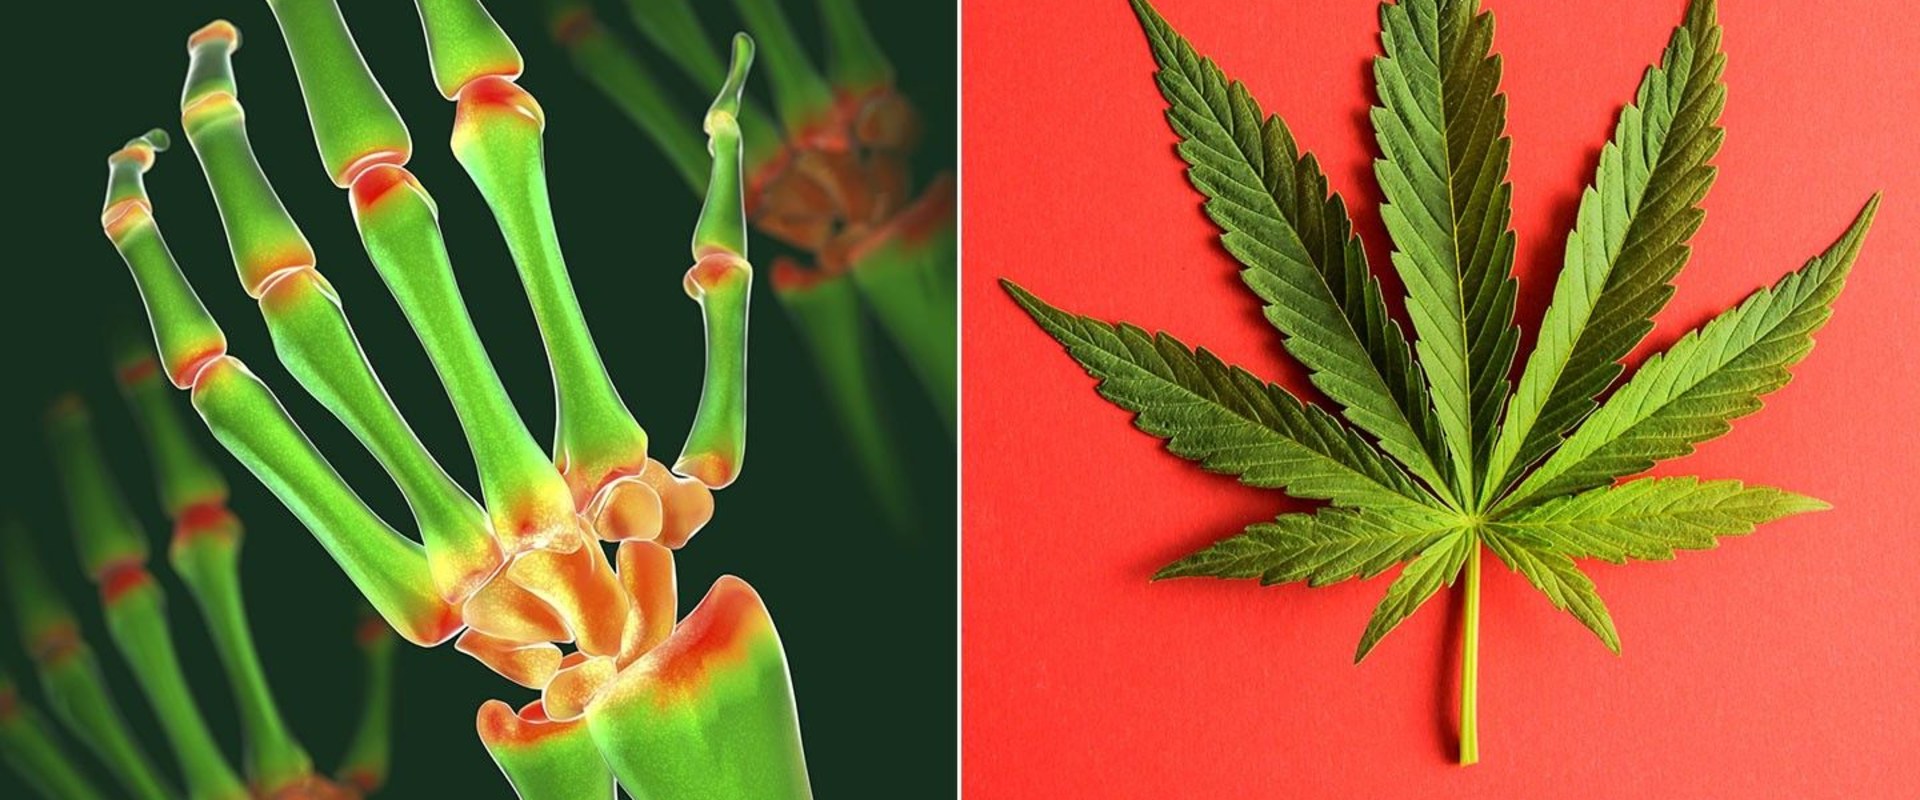 Does thc help with inflammation and pain?